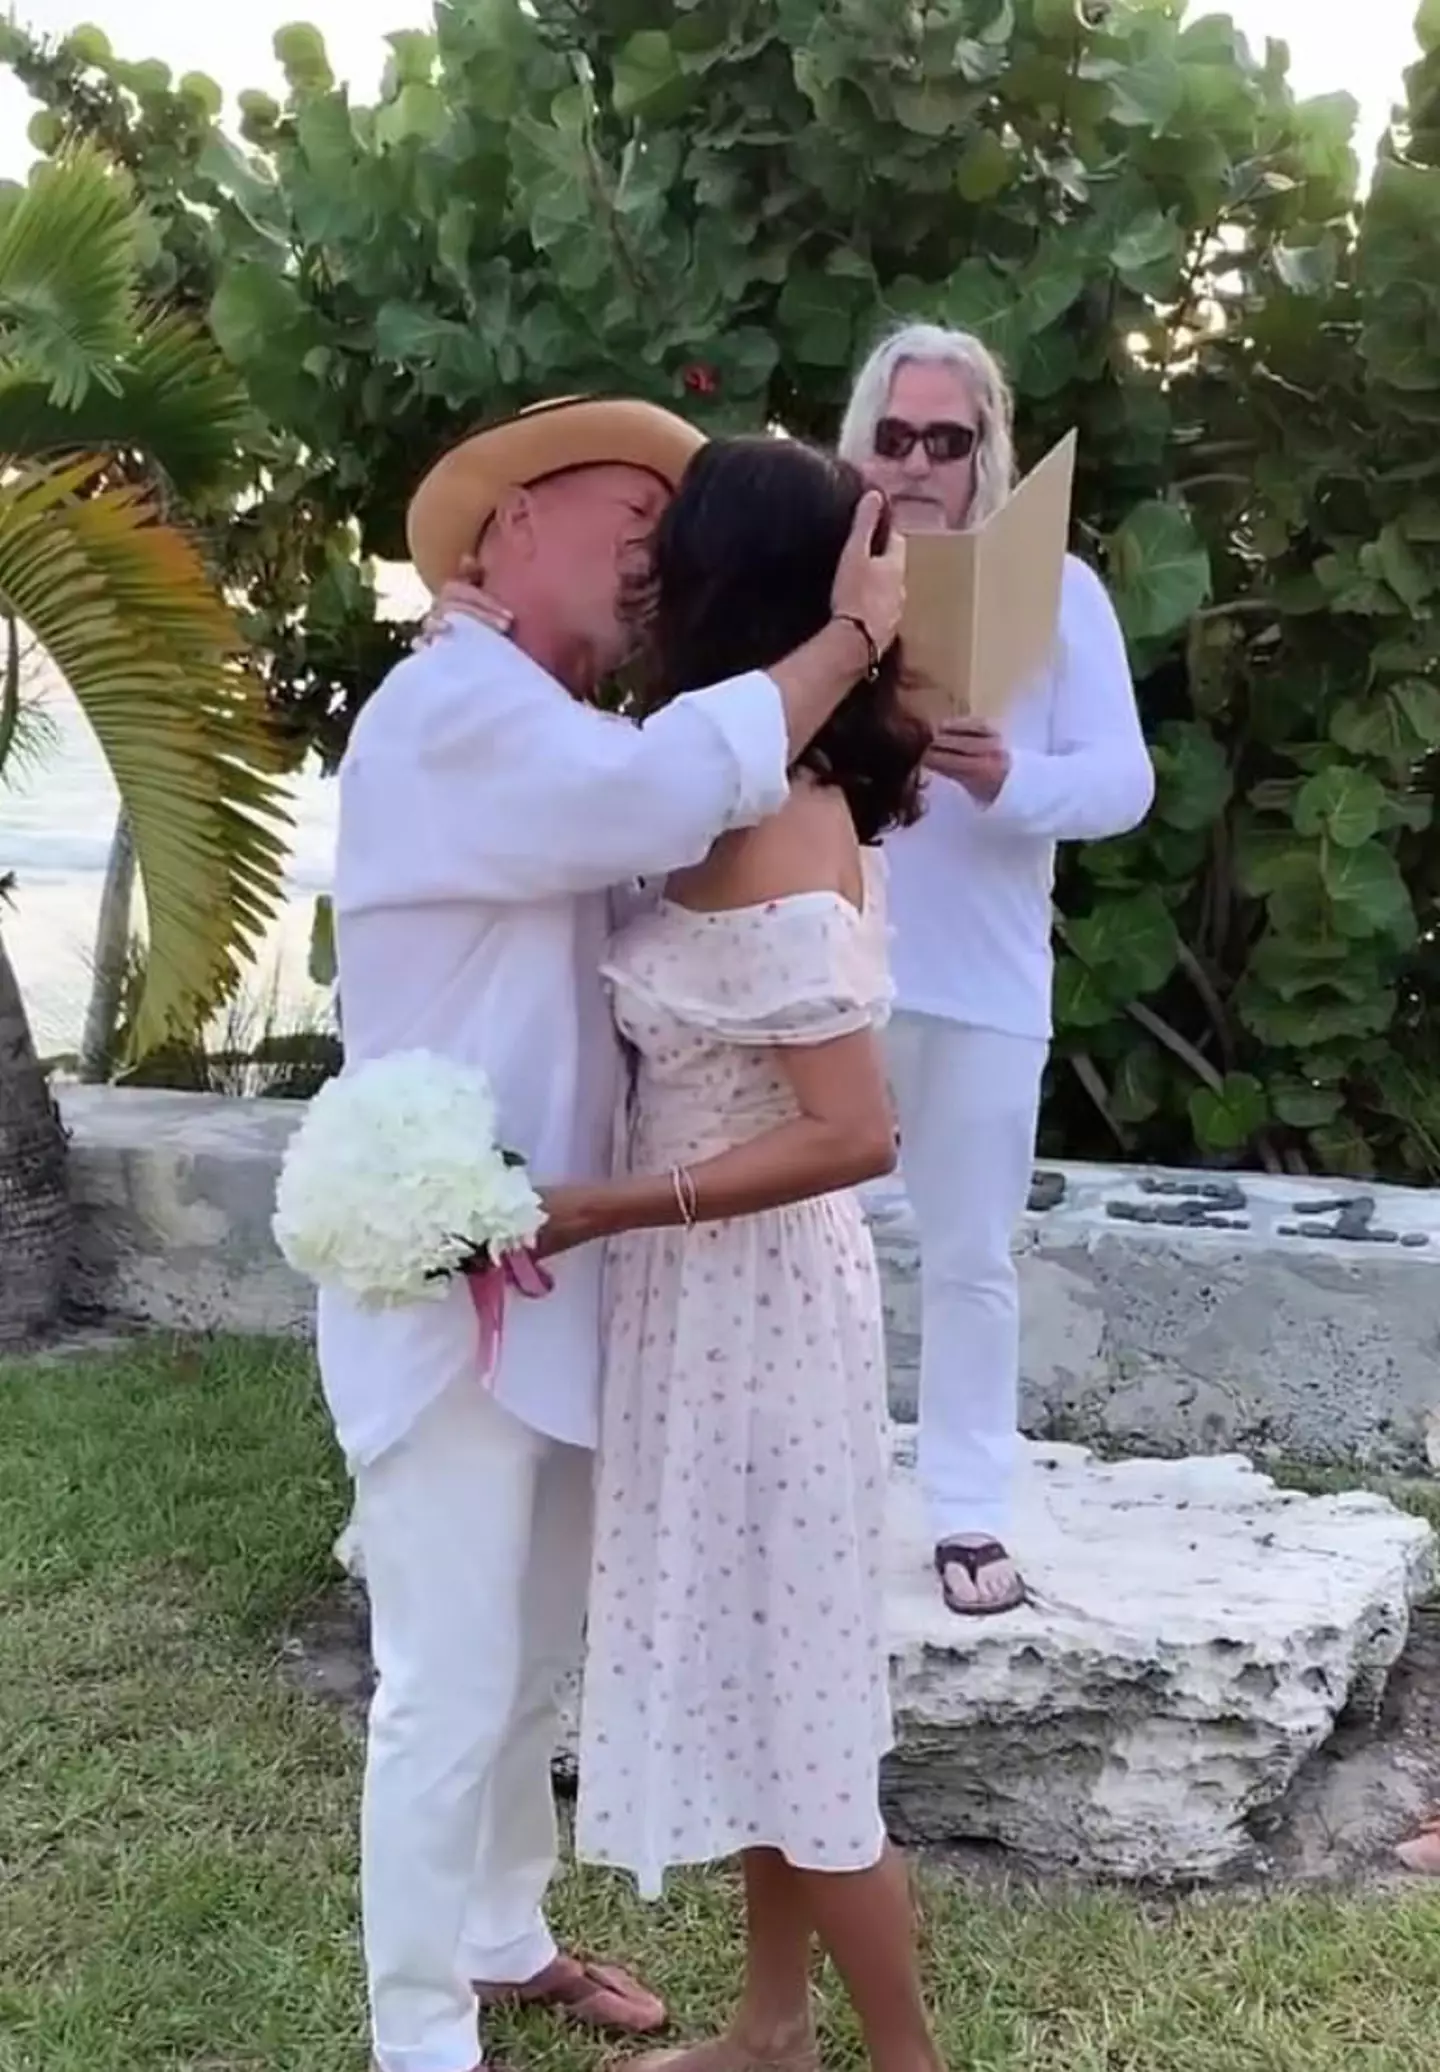 The actor shared a kiss with his wife Emma in the touching video.